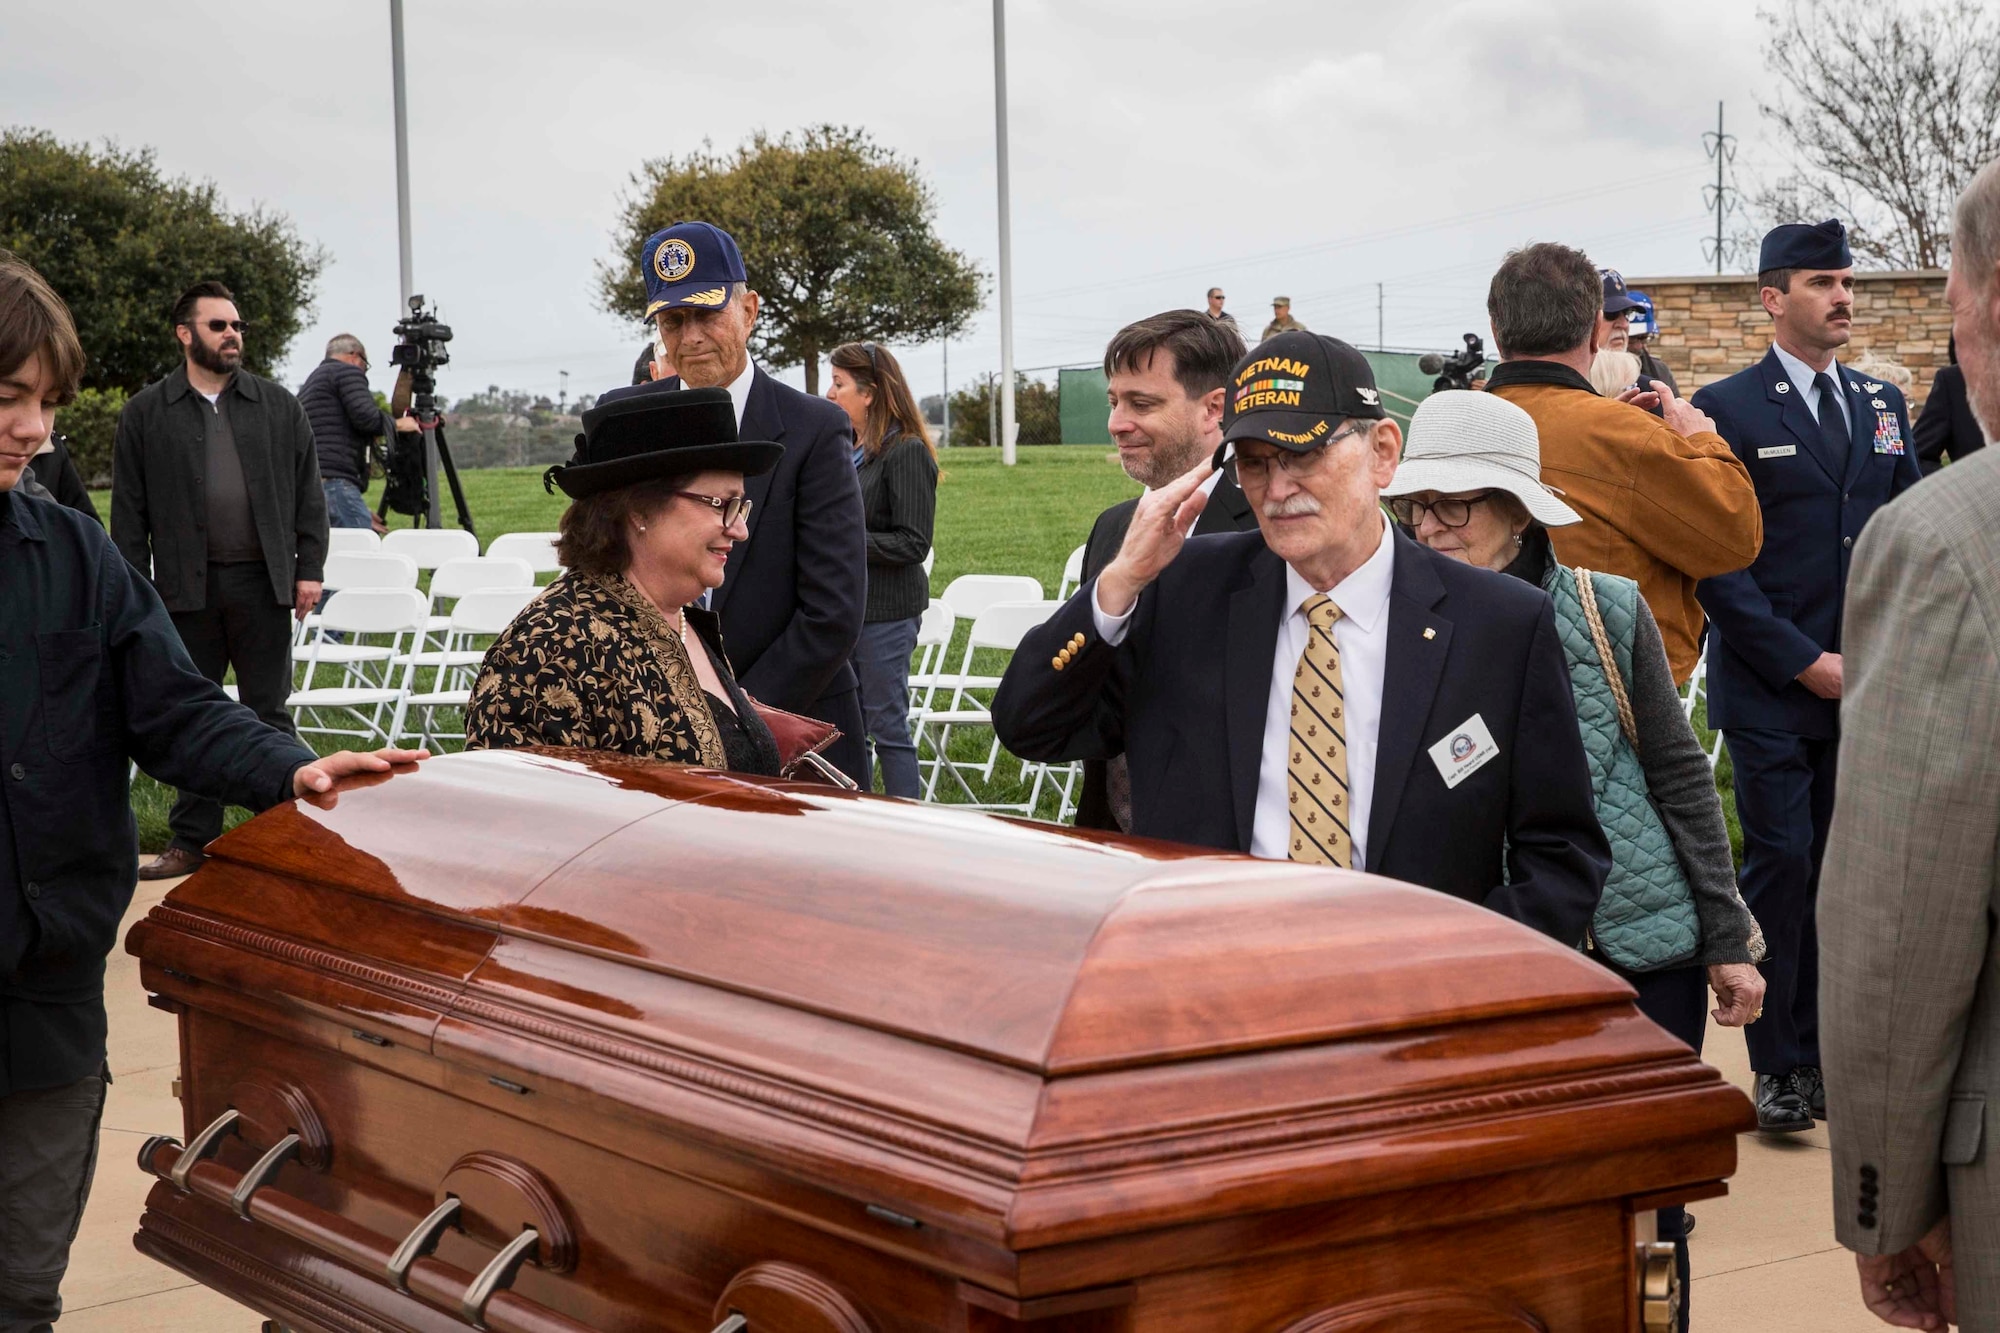 Family and friends pay respects to Air Force Brig. Gen. Robert Cardenas at the Miramar National Cemetery, San Diego, California, March 31, 2022. Cardenas was born March 10, 1920, and passed away March 10, 2022. (U.S. Marine Corps photo by Lance Cpl. Jose S. GuerreroDeLeon)